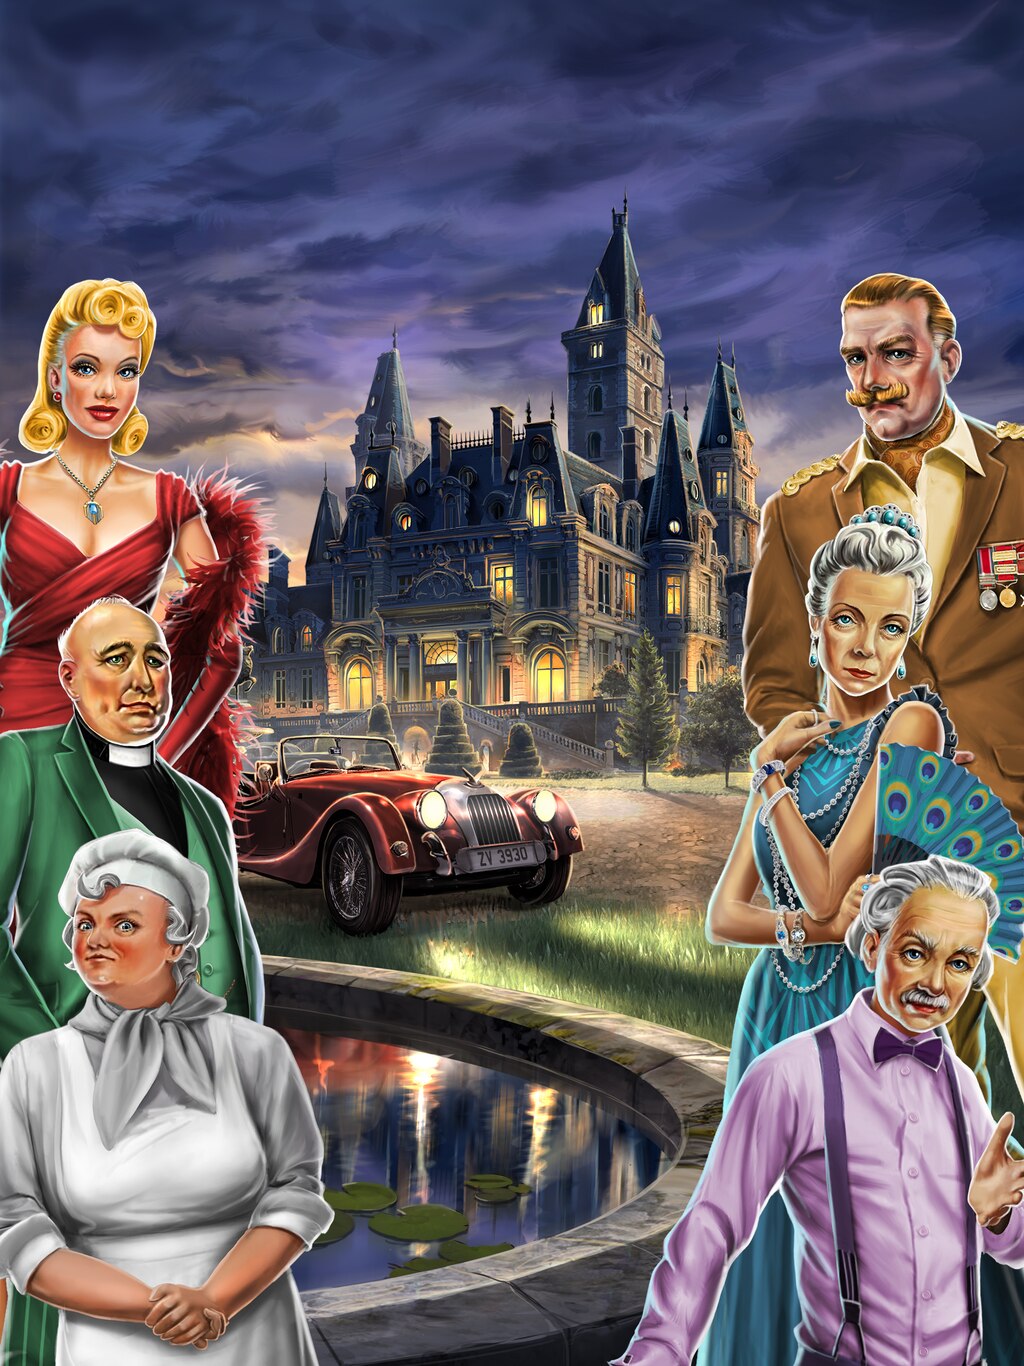 Save 20% on Clue/Cluedo: Classic Edition on Steam